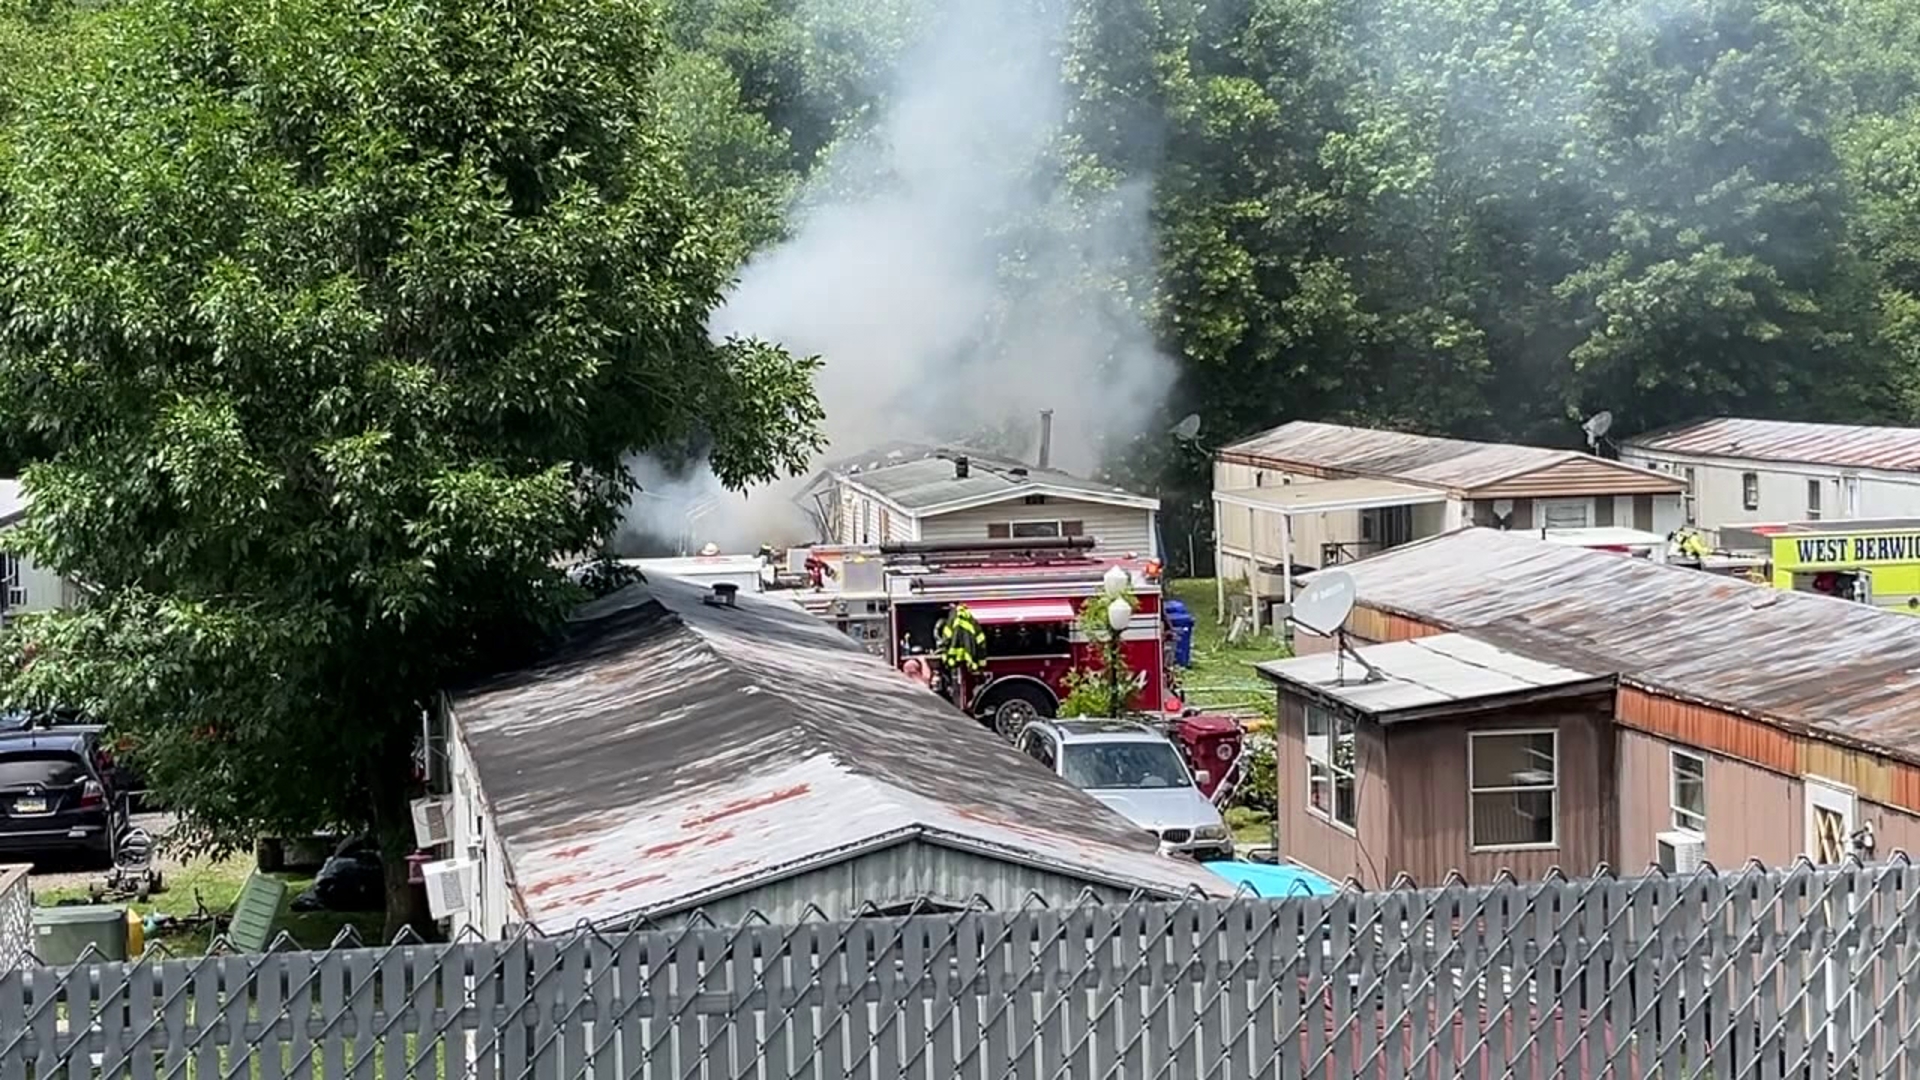 A fire damaged a mobile home in Briar Creek Township around 1:30 p.m. on Friday.